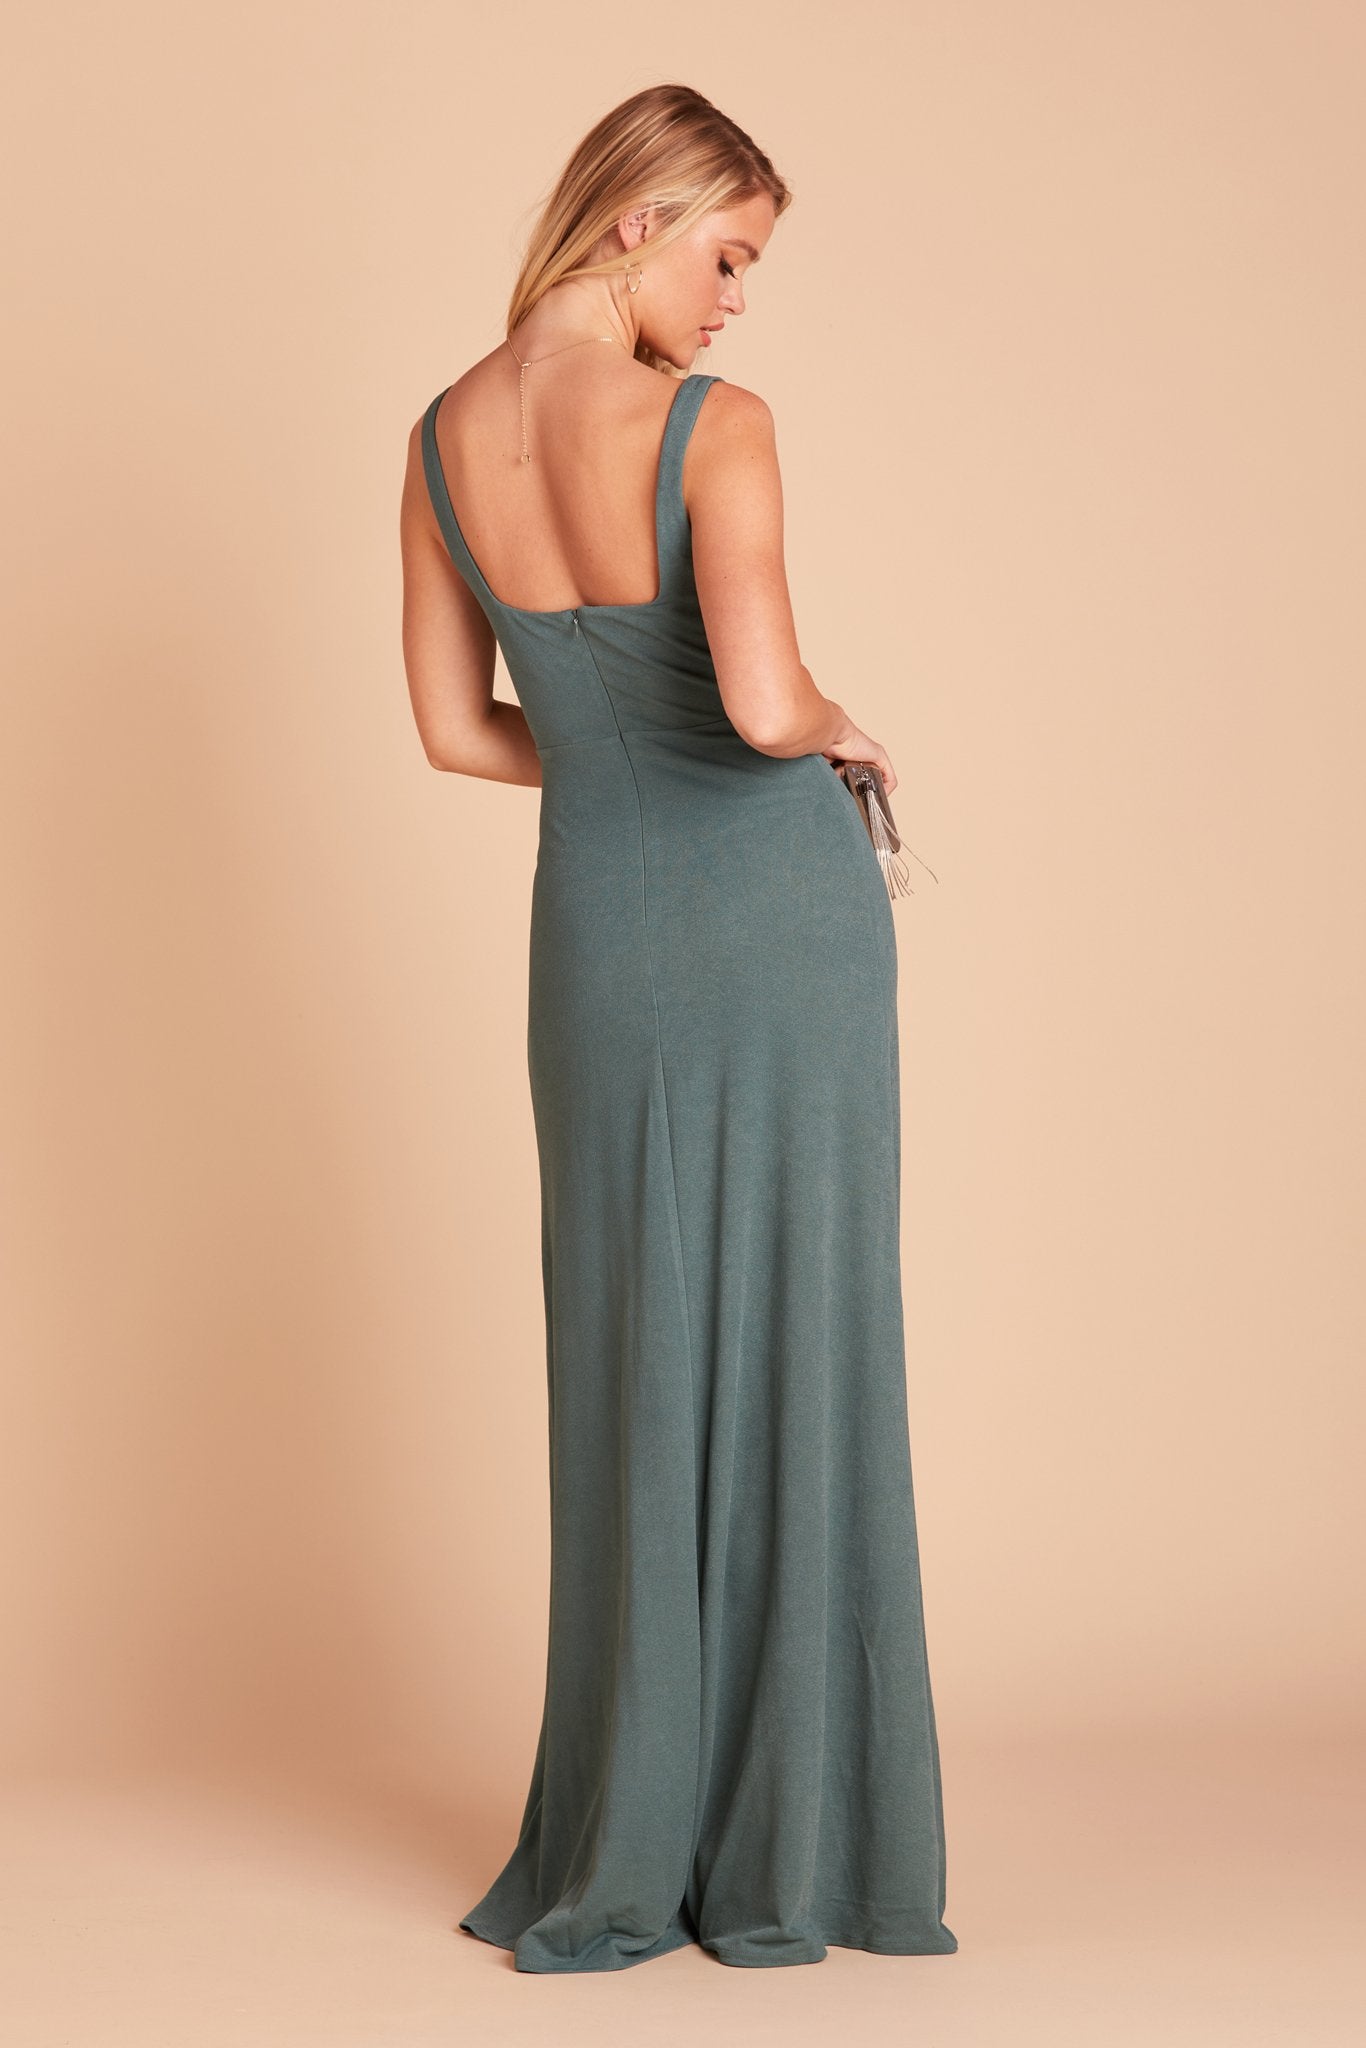 Alex convertible bridesmaid dress with slit in sea glass green crepe by Birdy Grey, back view